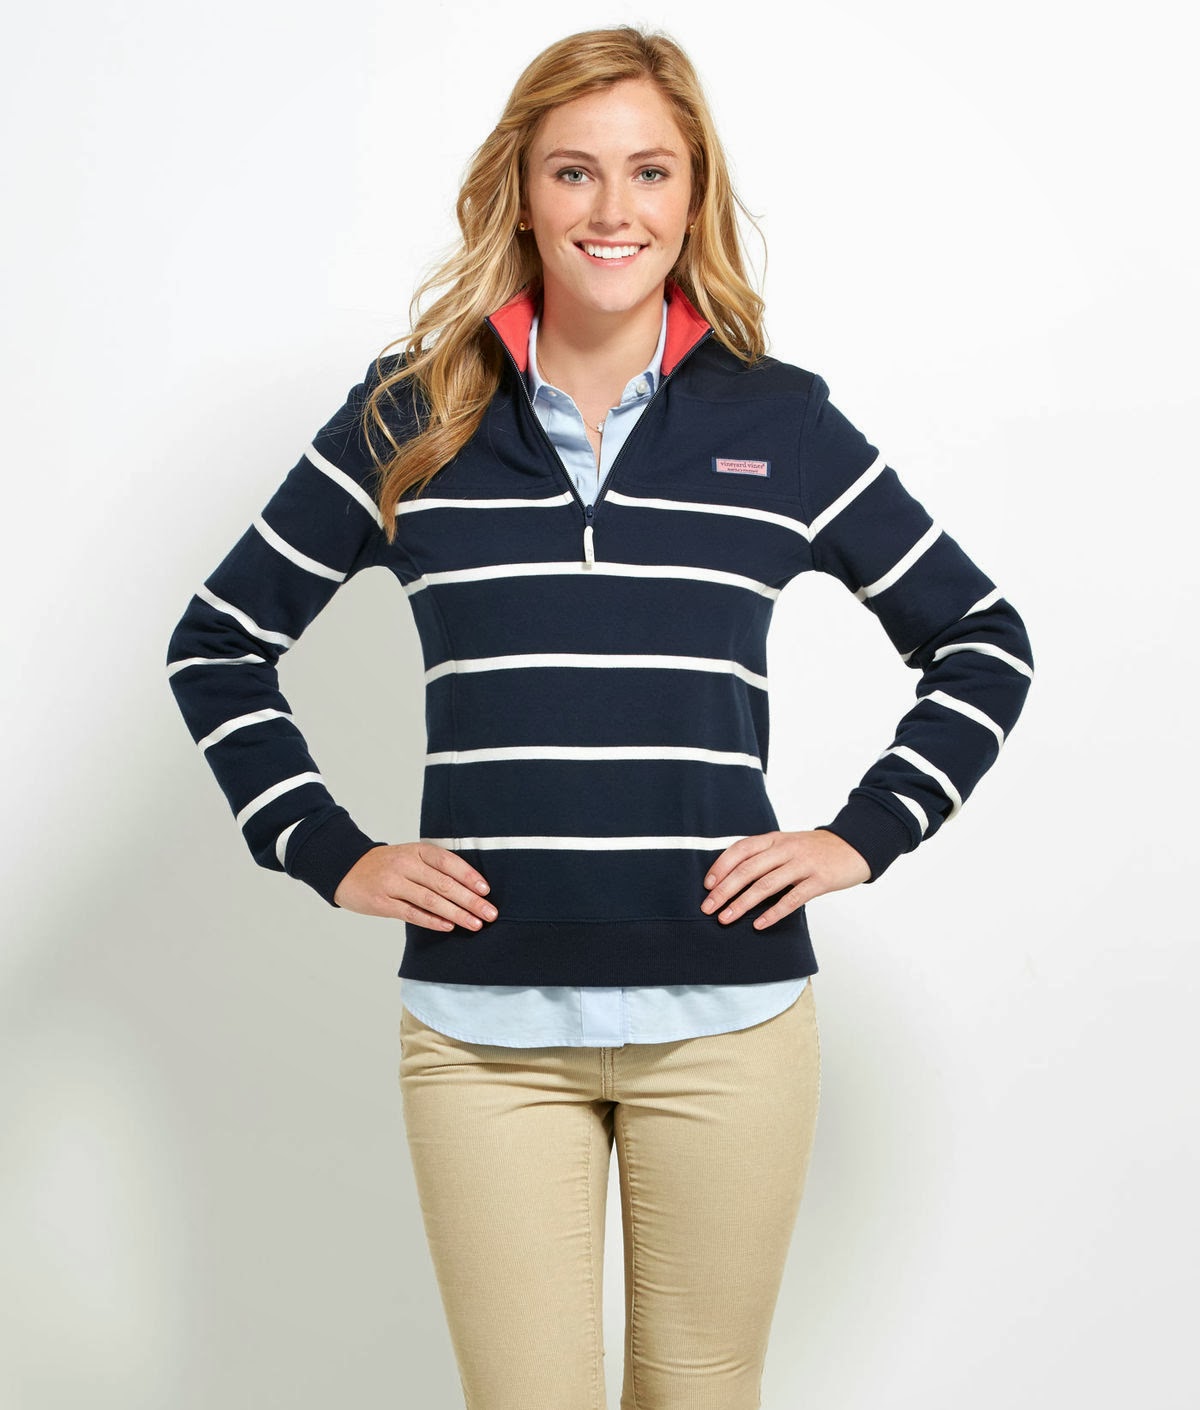 Nautical by Nature: Vineyard Vines 25% Off